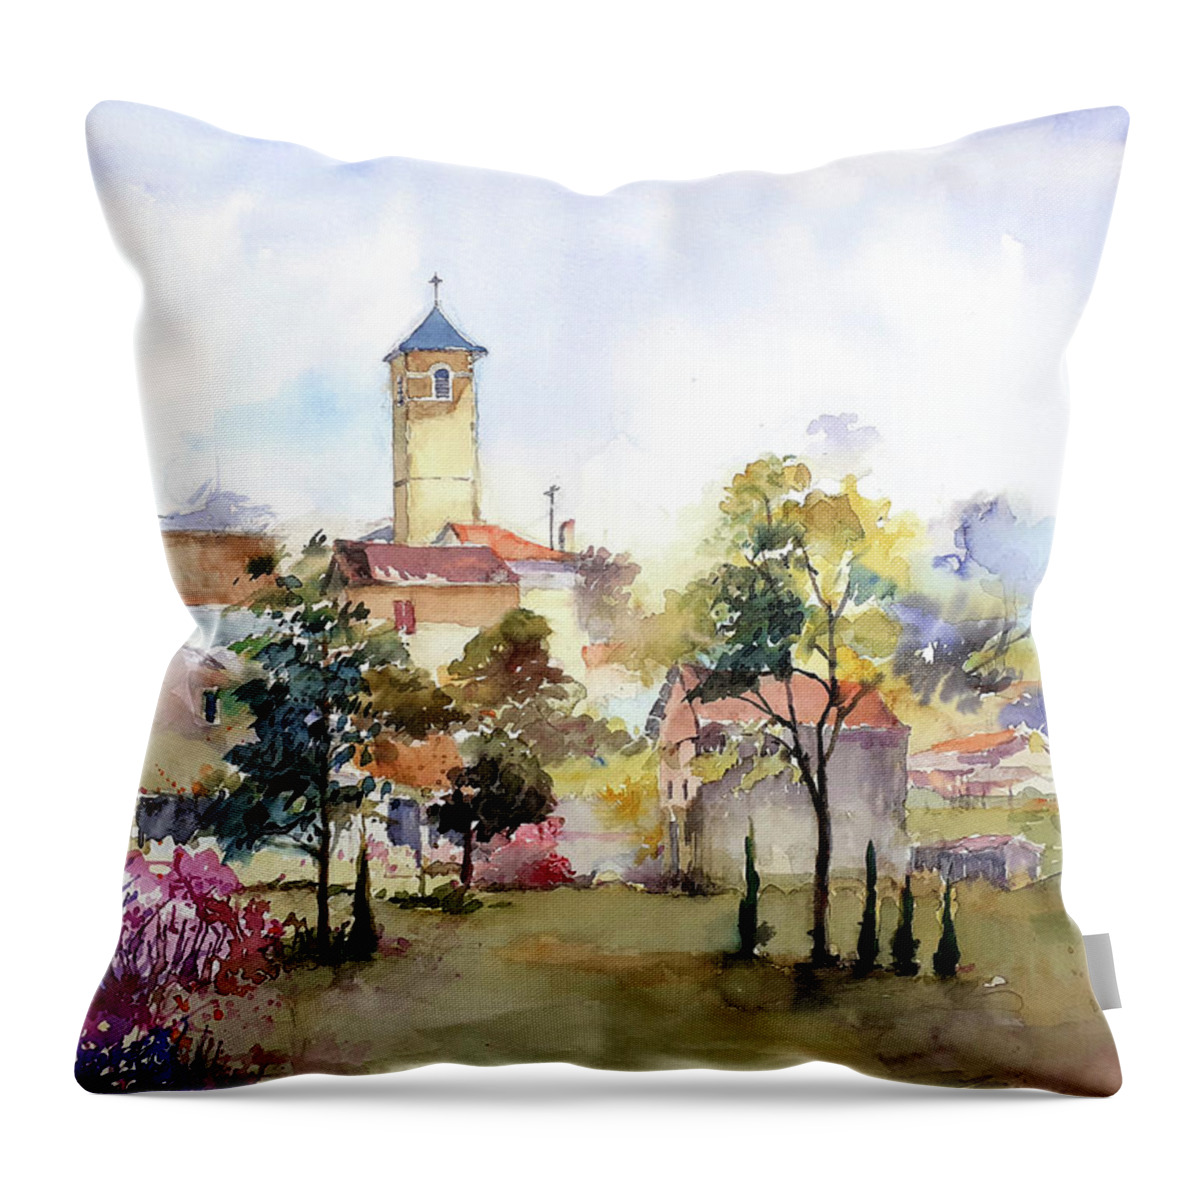 A Village In The South West Og France 'caresse' Is The Name Who Makes People Do Not Forget It Throw Pillow featuring the painting Village CARRESSE 64 by Kim PARDON